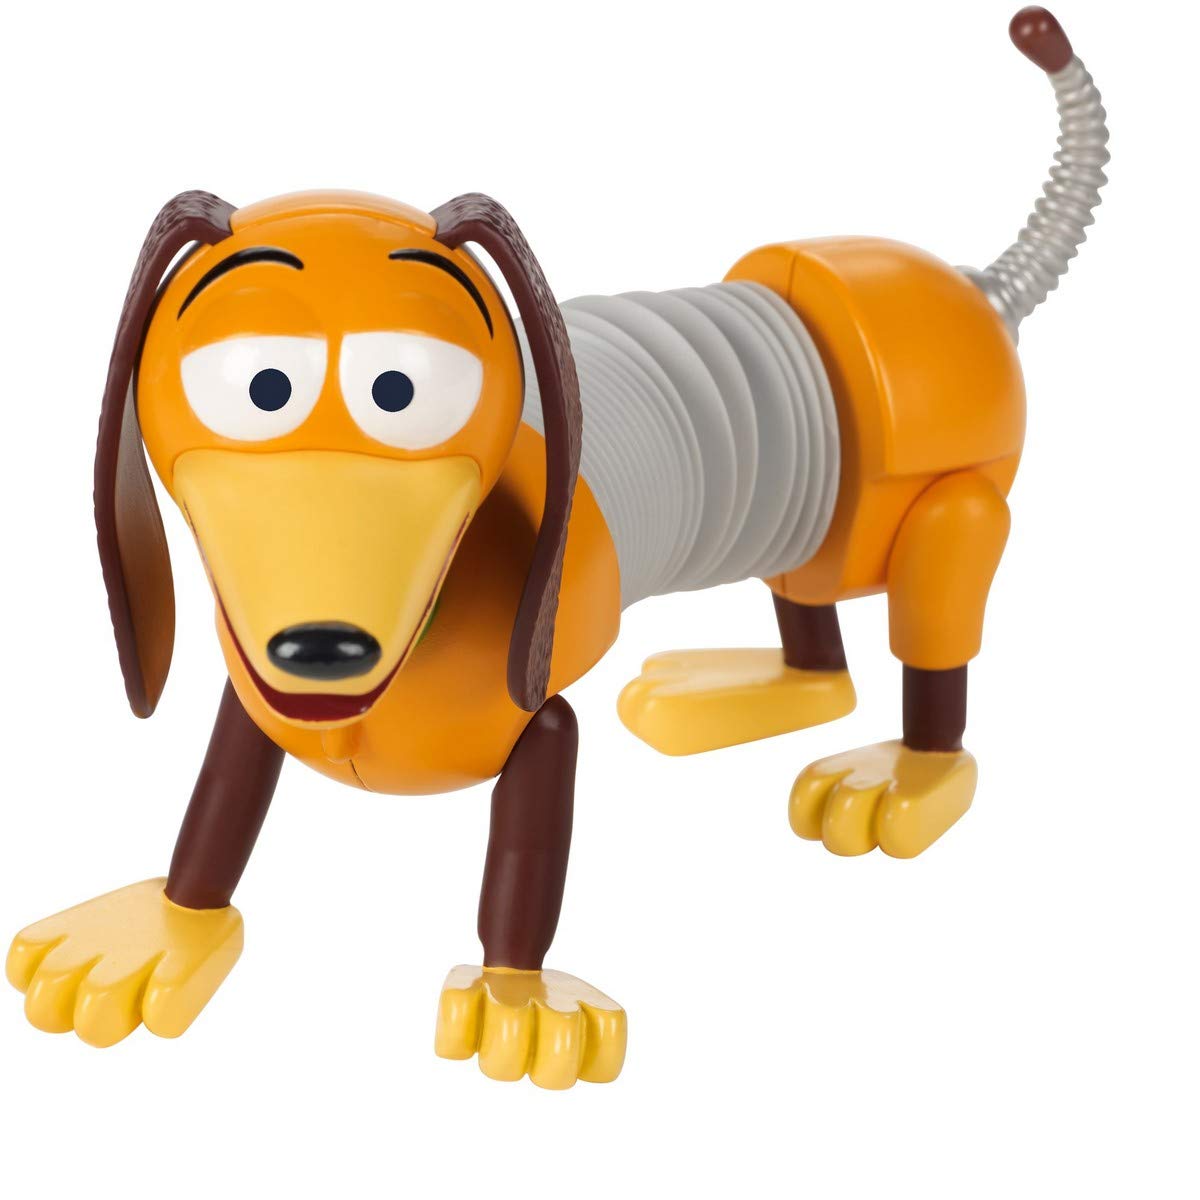 Mattel Ggx37 Toy Story 4 Dog Slinky Figure 17 Cm Toy Action Figure From 3 Y